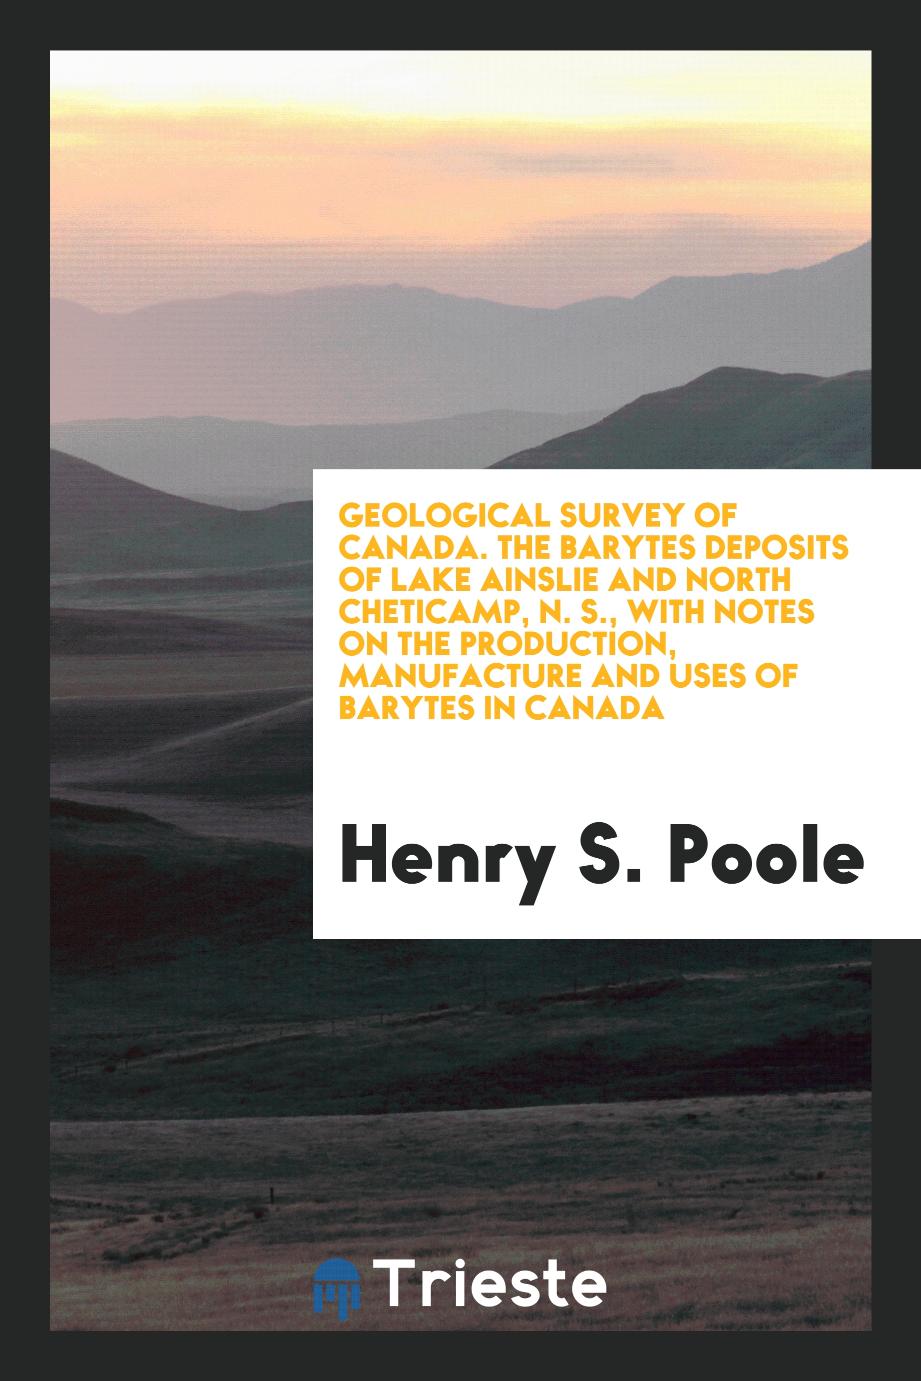 Geological survey of Canada. The barytes deposits of Lake Ainslie and North Cheticamp, N. S., with notes on the production, manufacture and uses of barytes in Canada